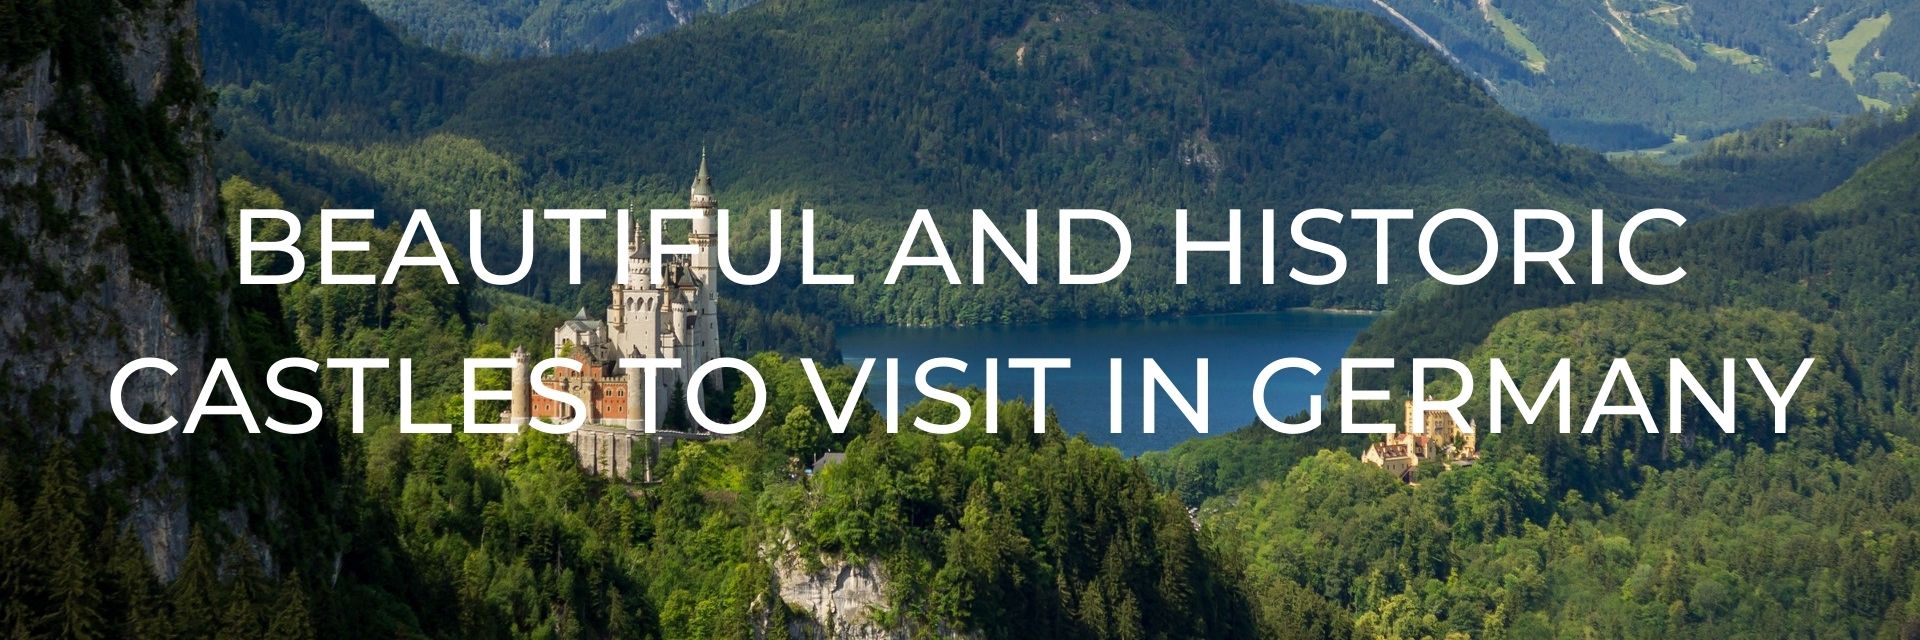 Beautiful and Historic Castles to Visit in Germany Desktop Header